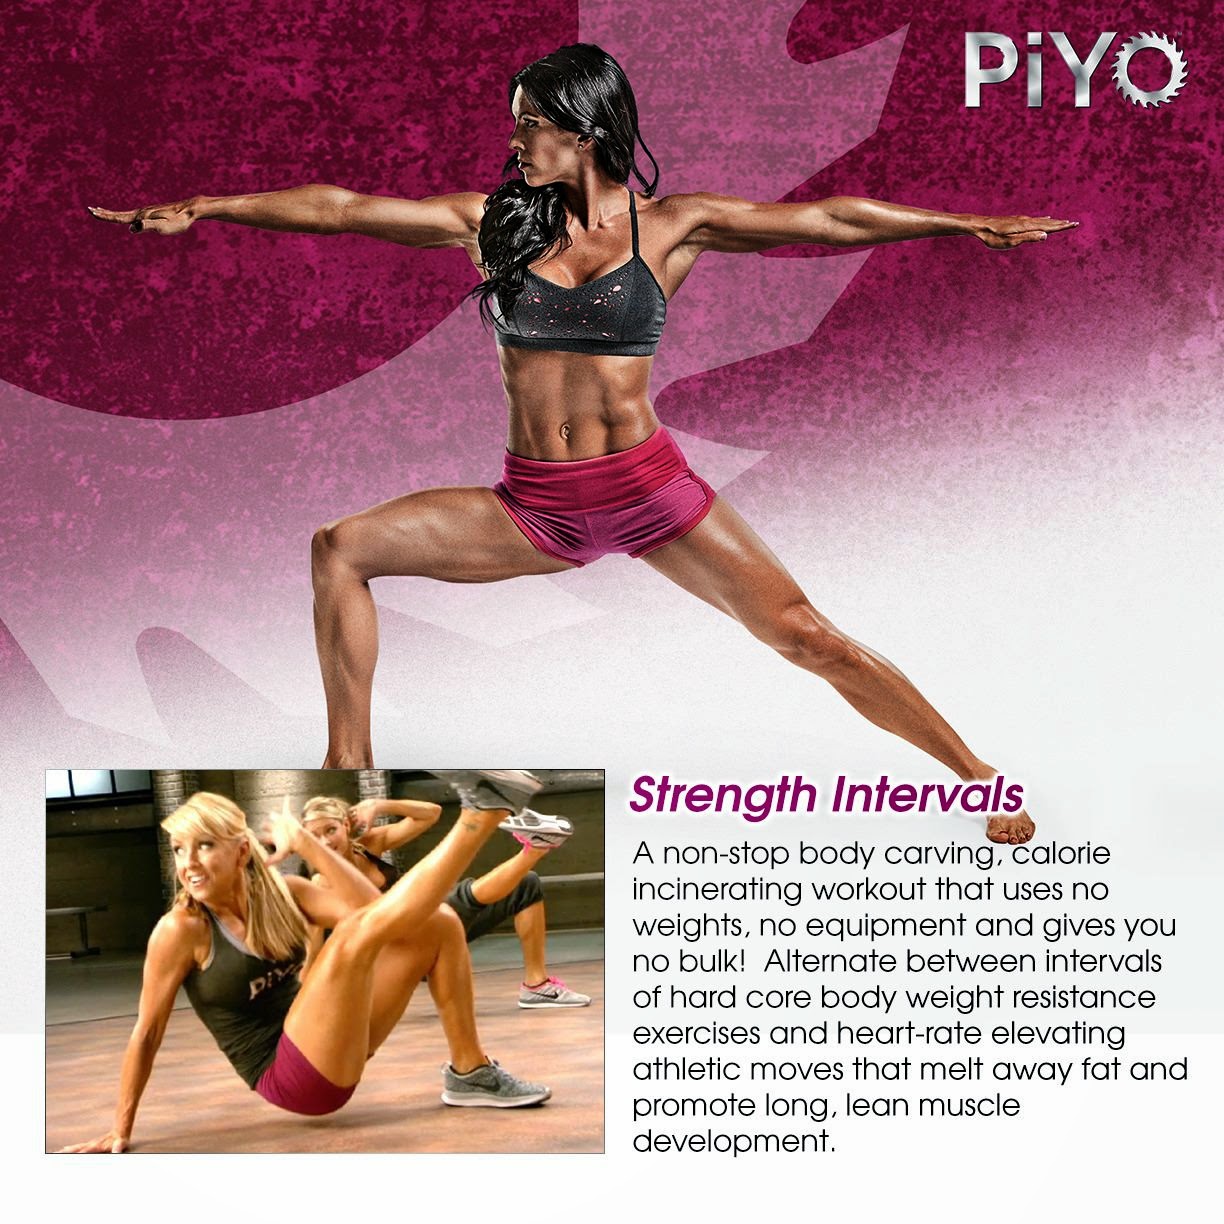 Fill Me With Meaning Piyo Strength Intervals Review.